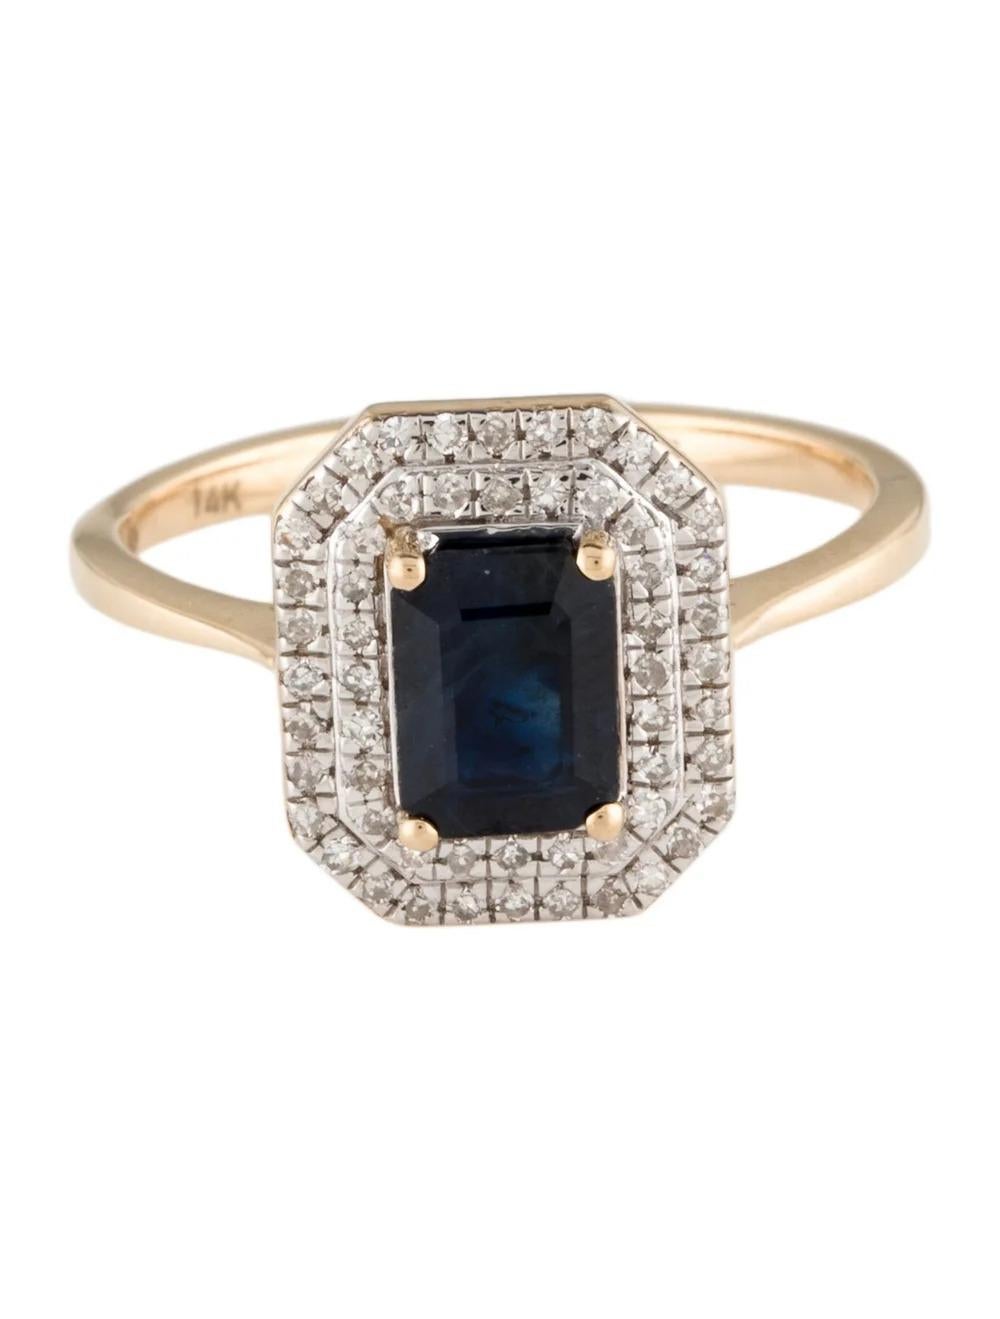 Emerald Cut Vintage 14K Sapphire & Diamond Cocktail Ring - Size 7 - Gemstone Jewelry For Sale